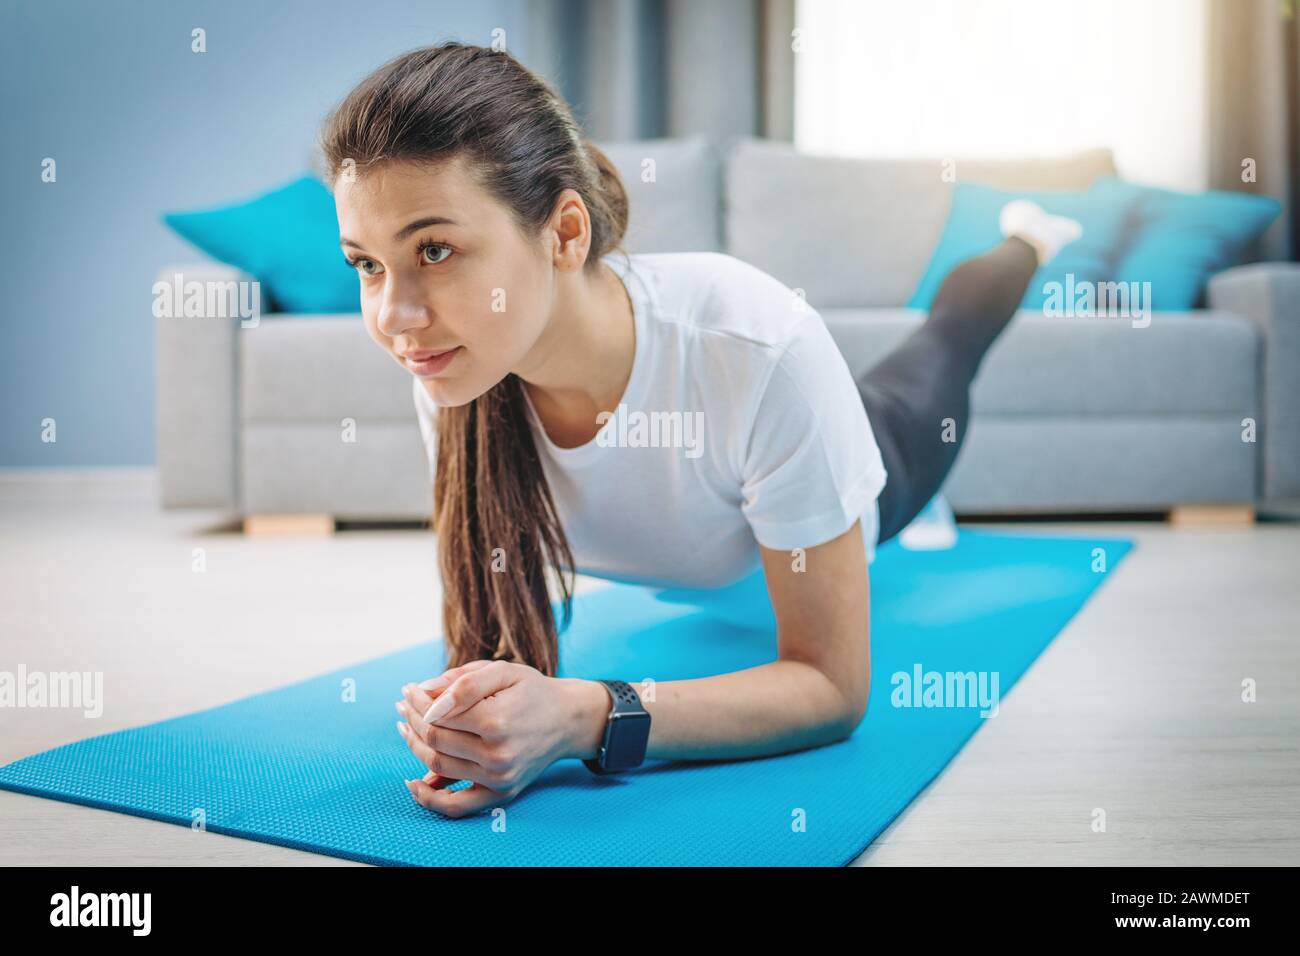 A Enthusiastic Slim Beauty Making Stretching Exercises Stock Photo